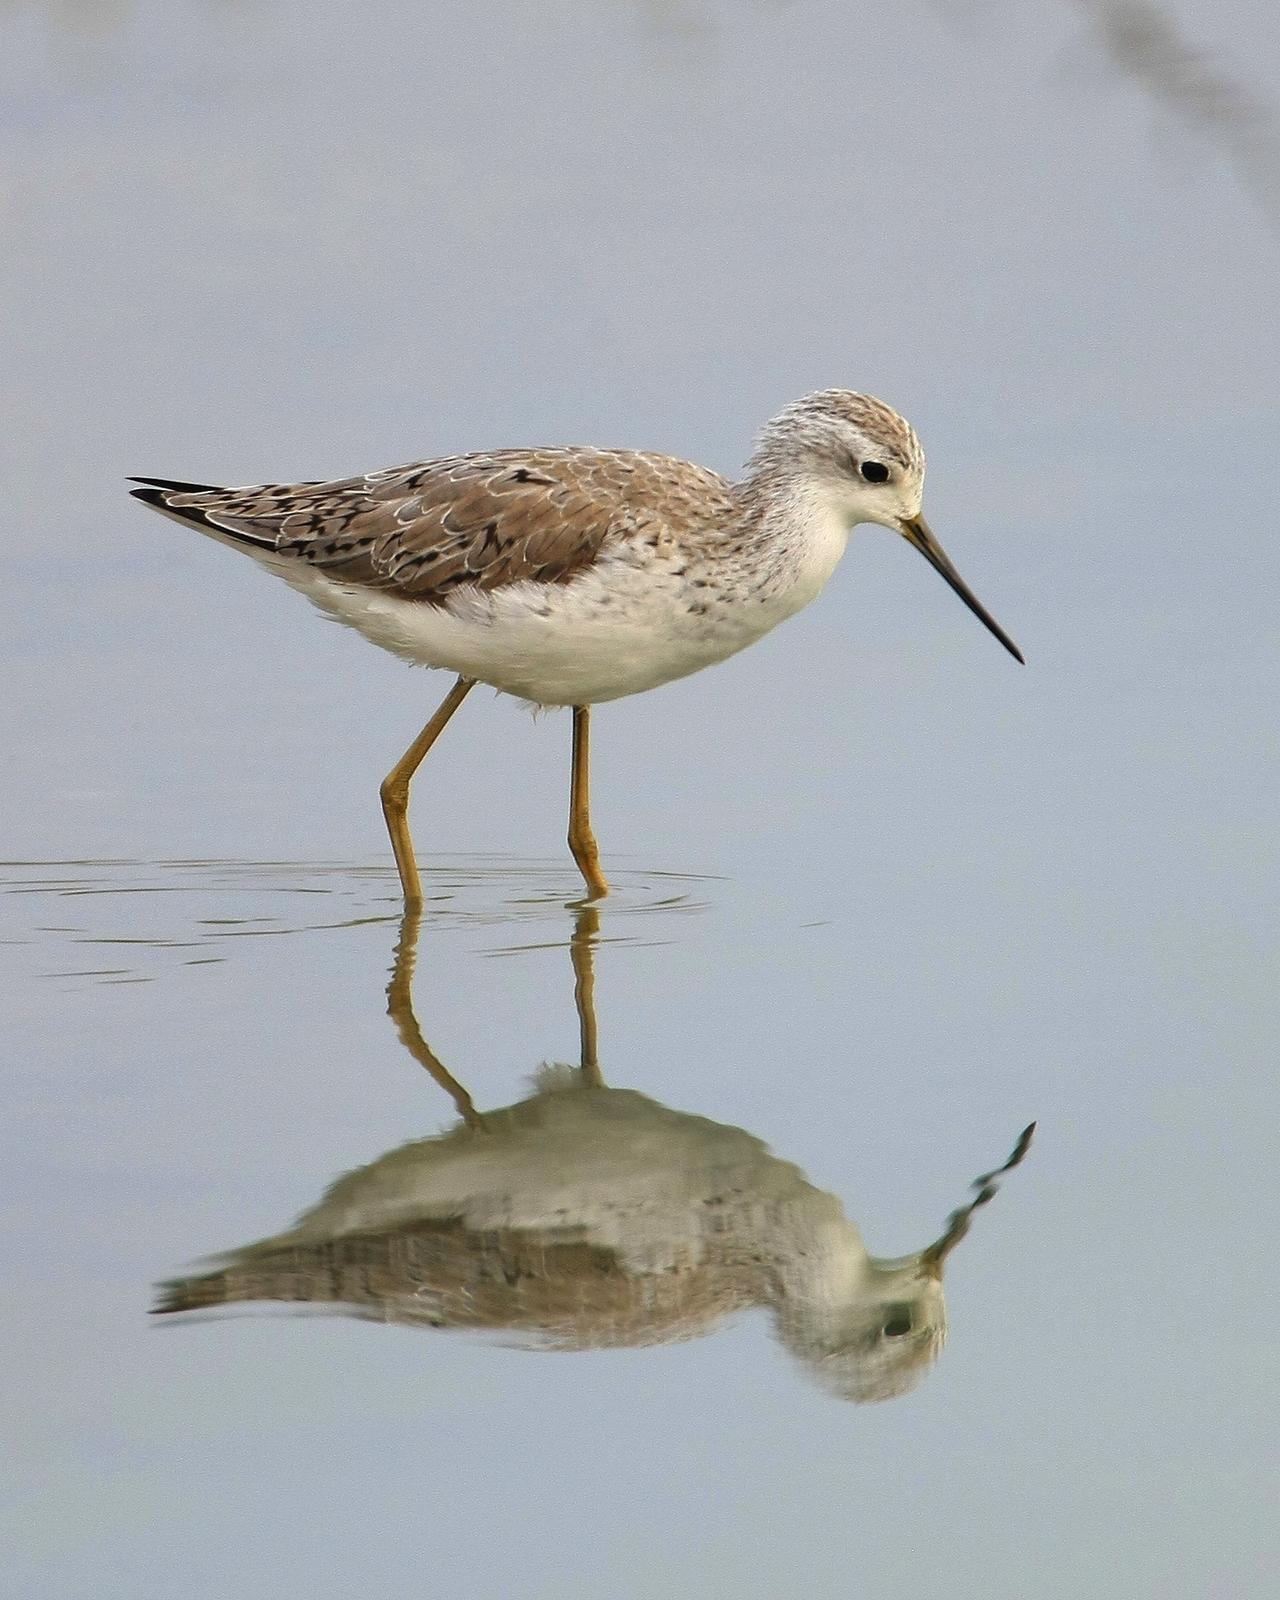 Marsh Sandpiper Photo by Monte Taylor